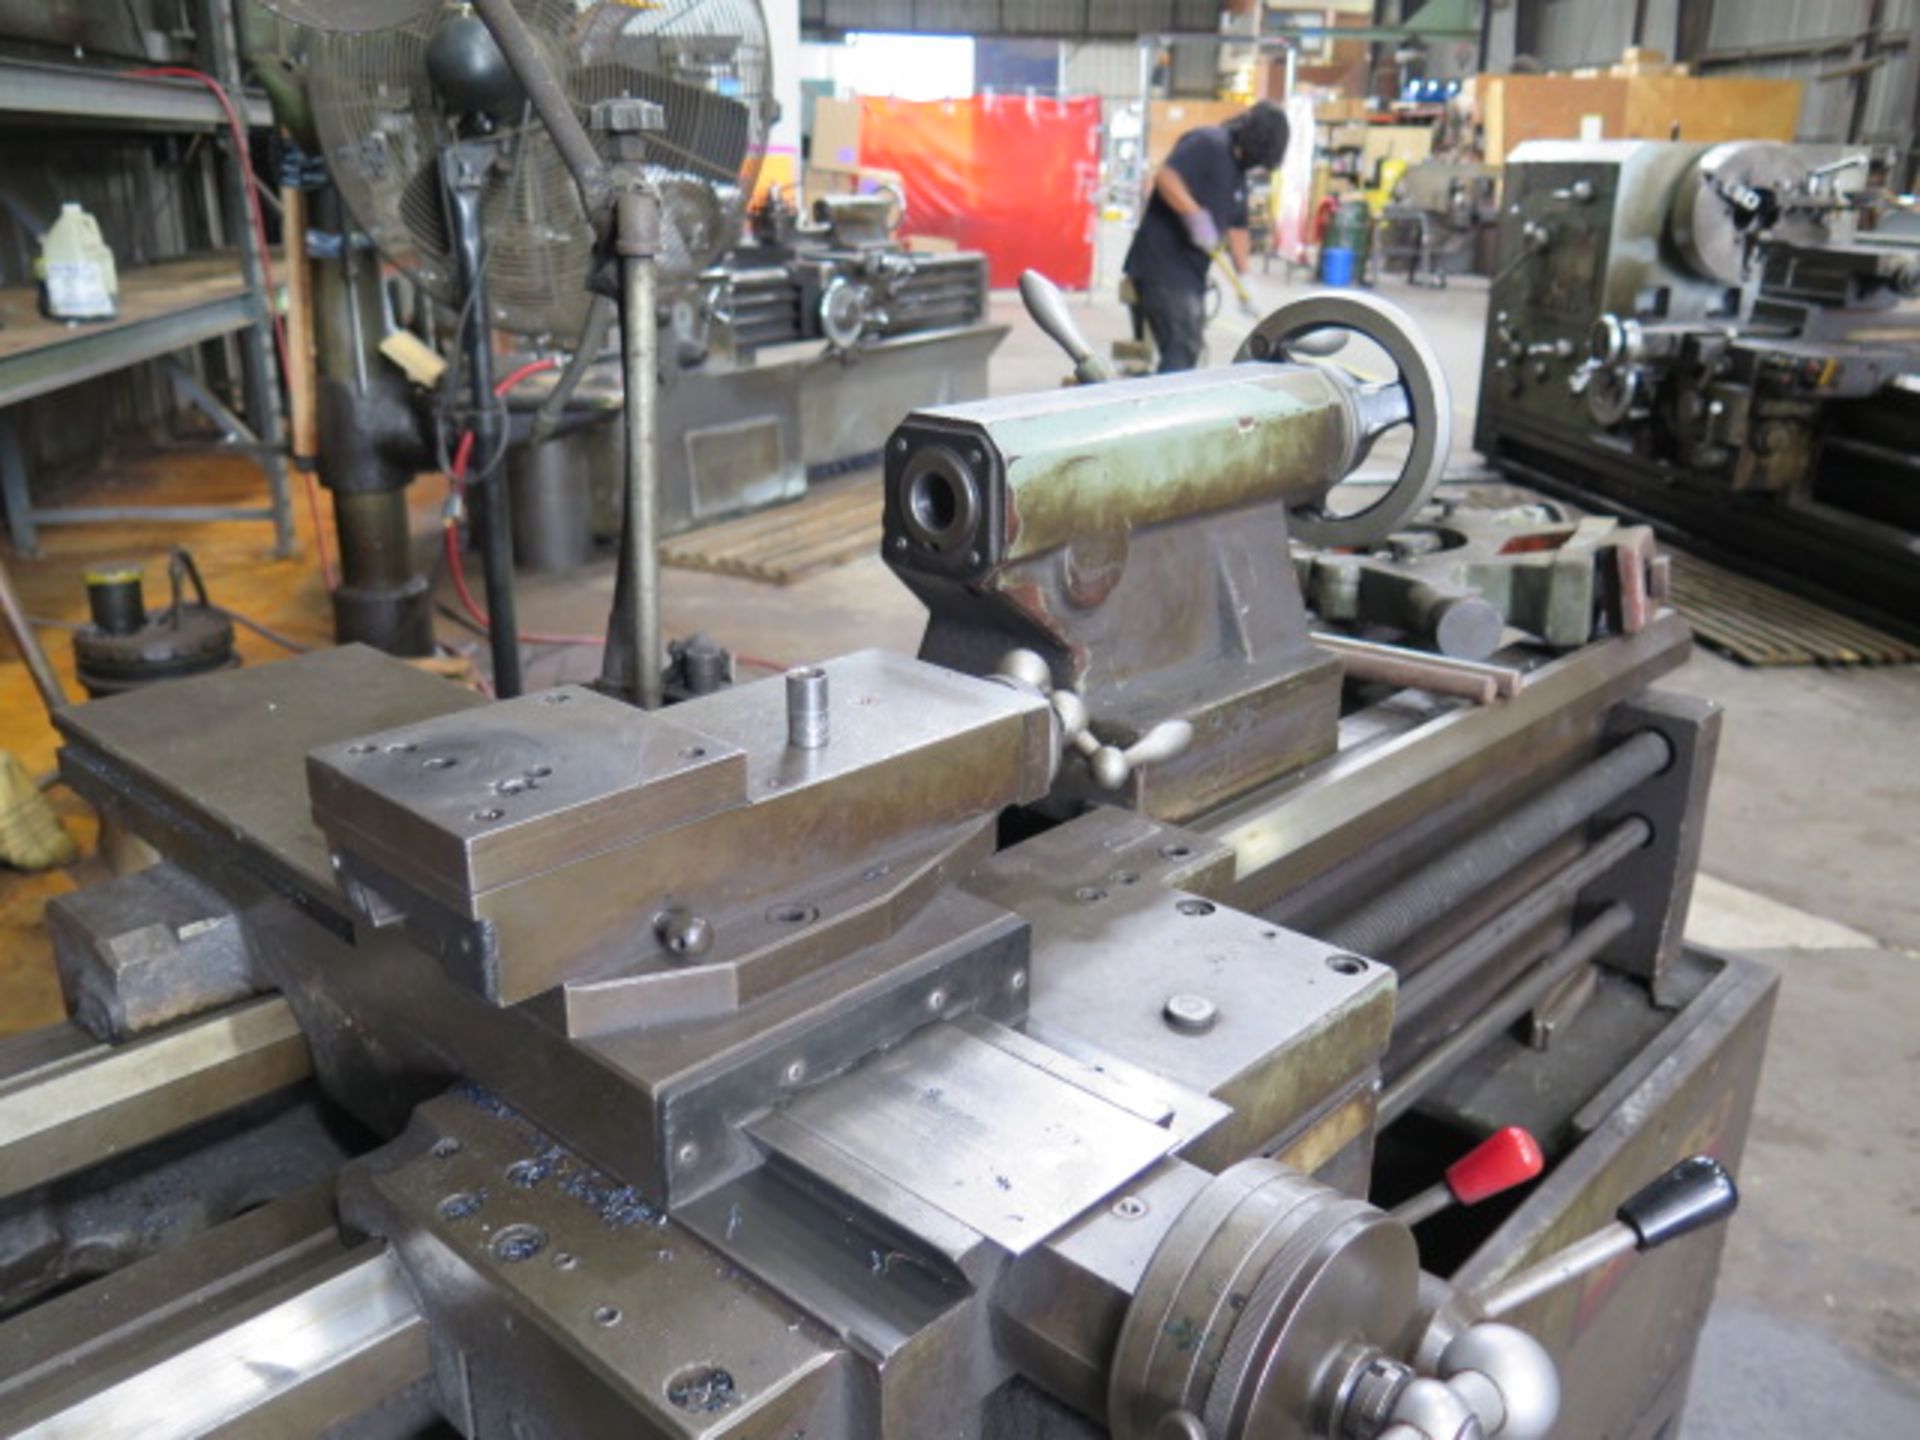 Tongil TIPL-4 15” x 42” Geared Head Gap Bed Lathe w/ 60-1500 RPM, Inch/mm Threading, SOLD AS IS - Image 10 of 12